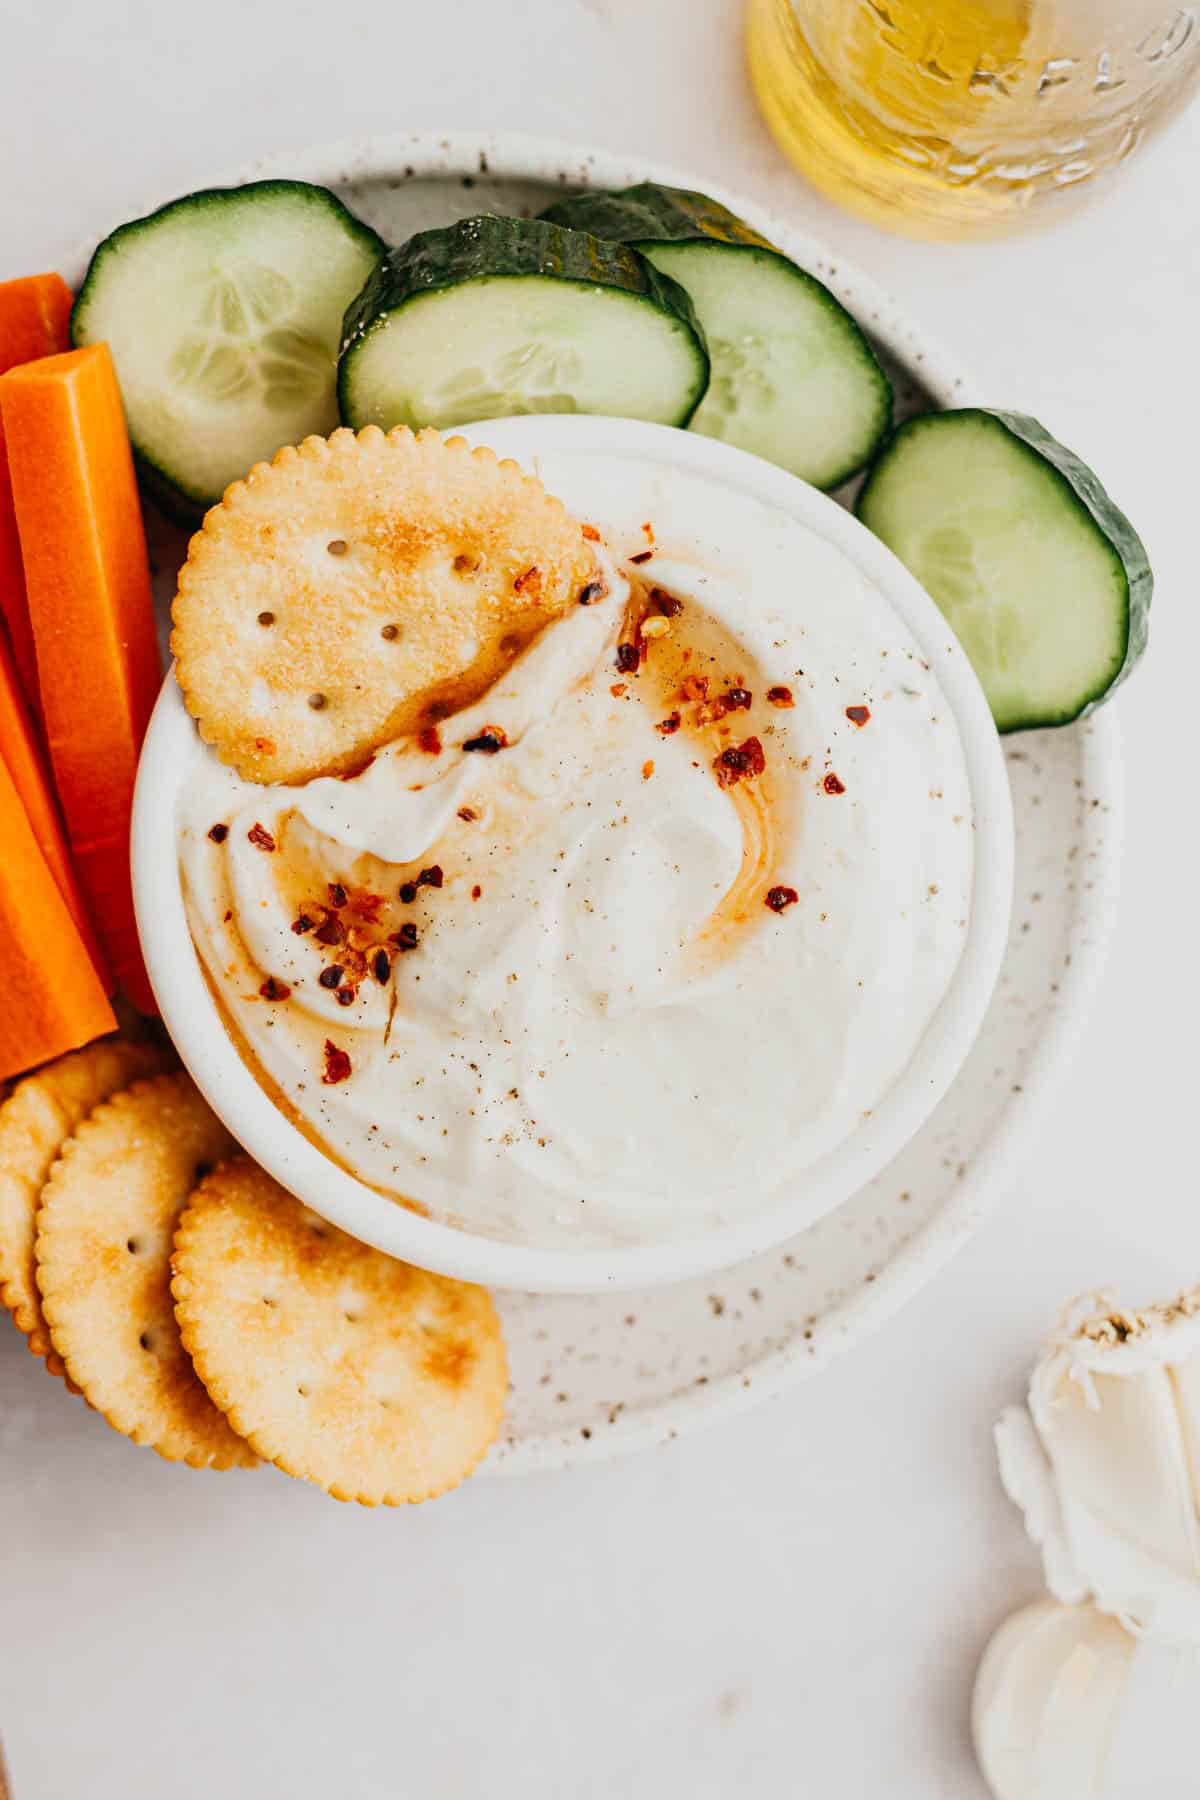 A white bowl filled with whipped ricotta dip and drizzled with hot honey, it is surrounded by cut up vegetables.